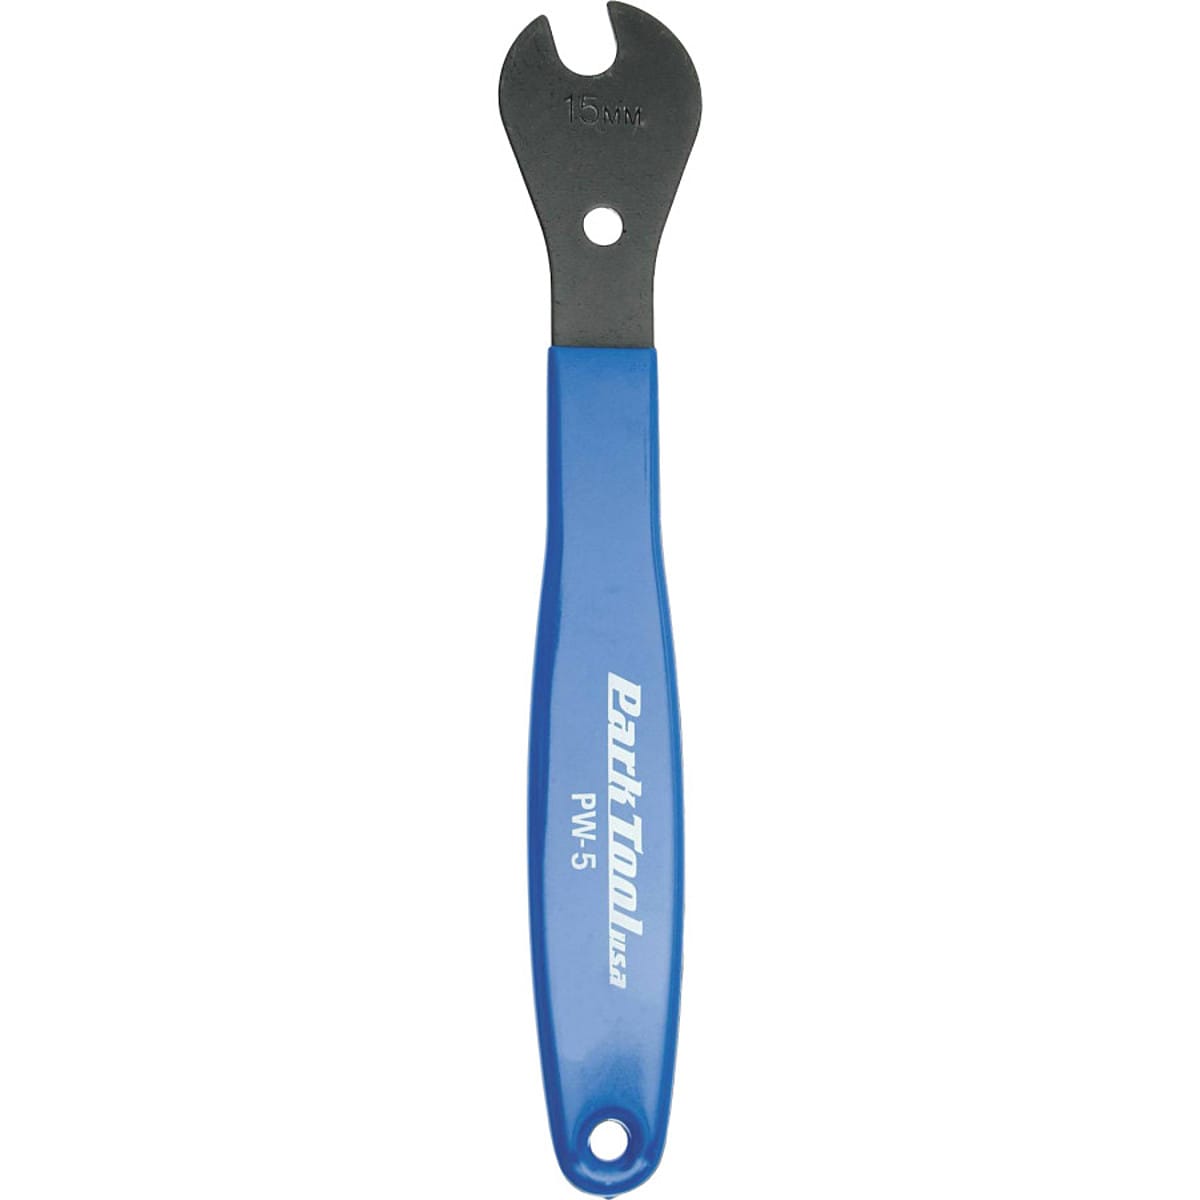 Park Tool Home Mechanic Pedal Wrench PW 5